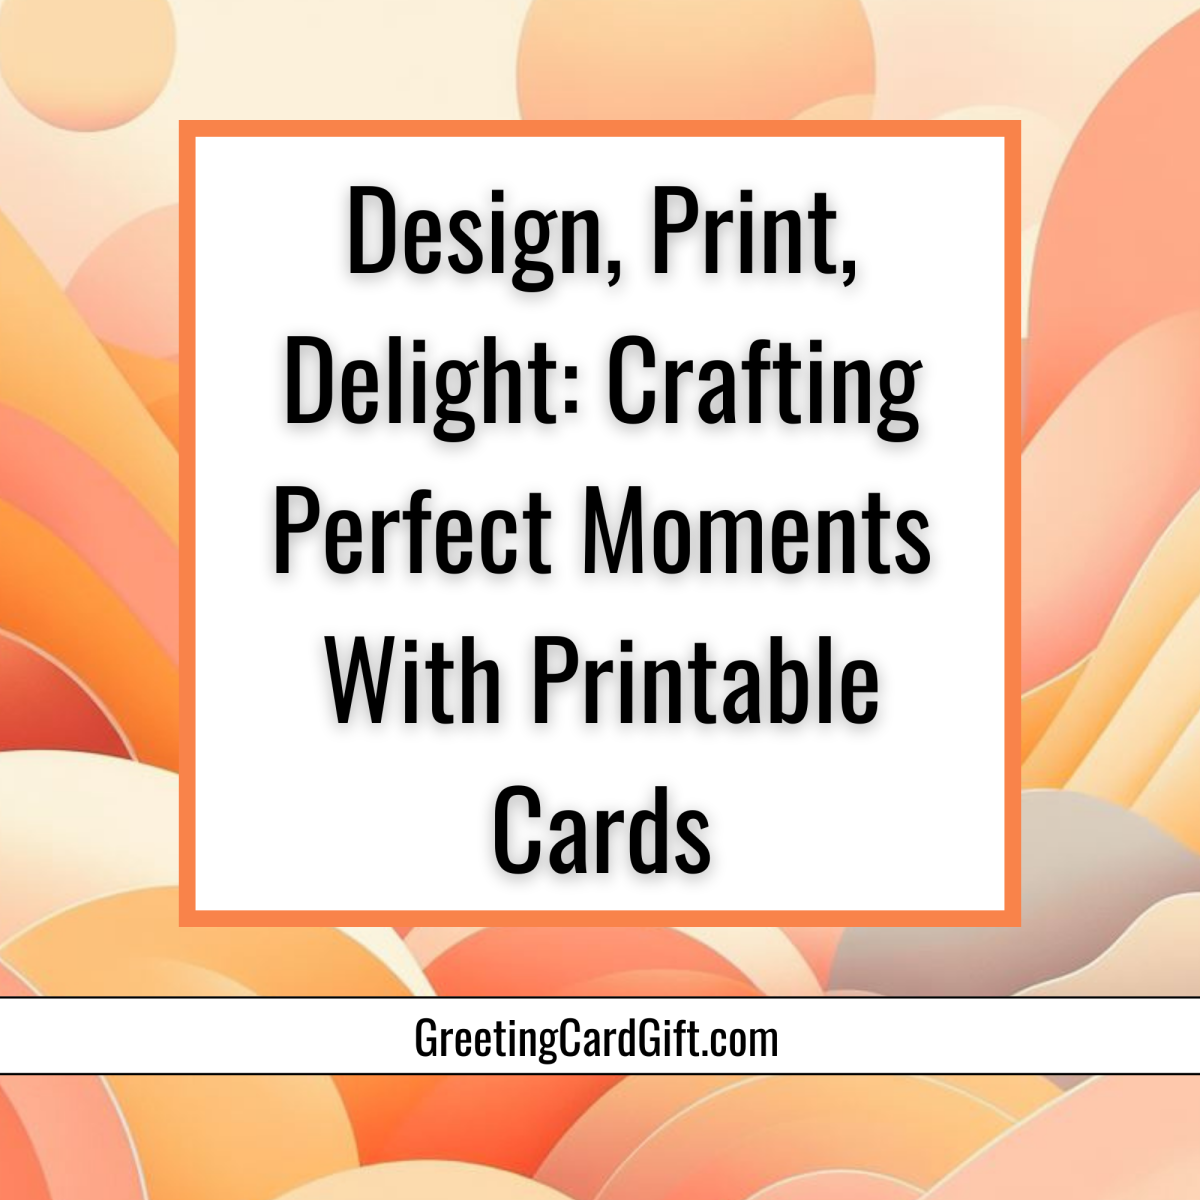 Design, Print, Delight: Crafting Perfect Moments With Printable Cards